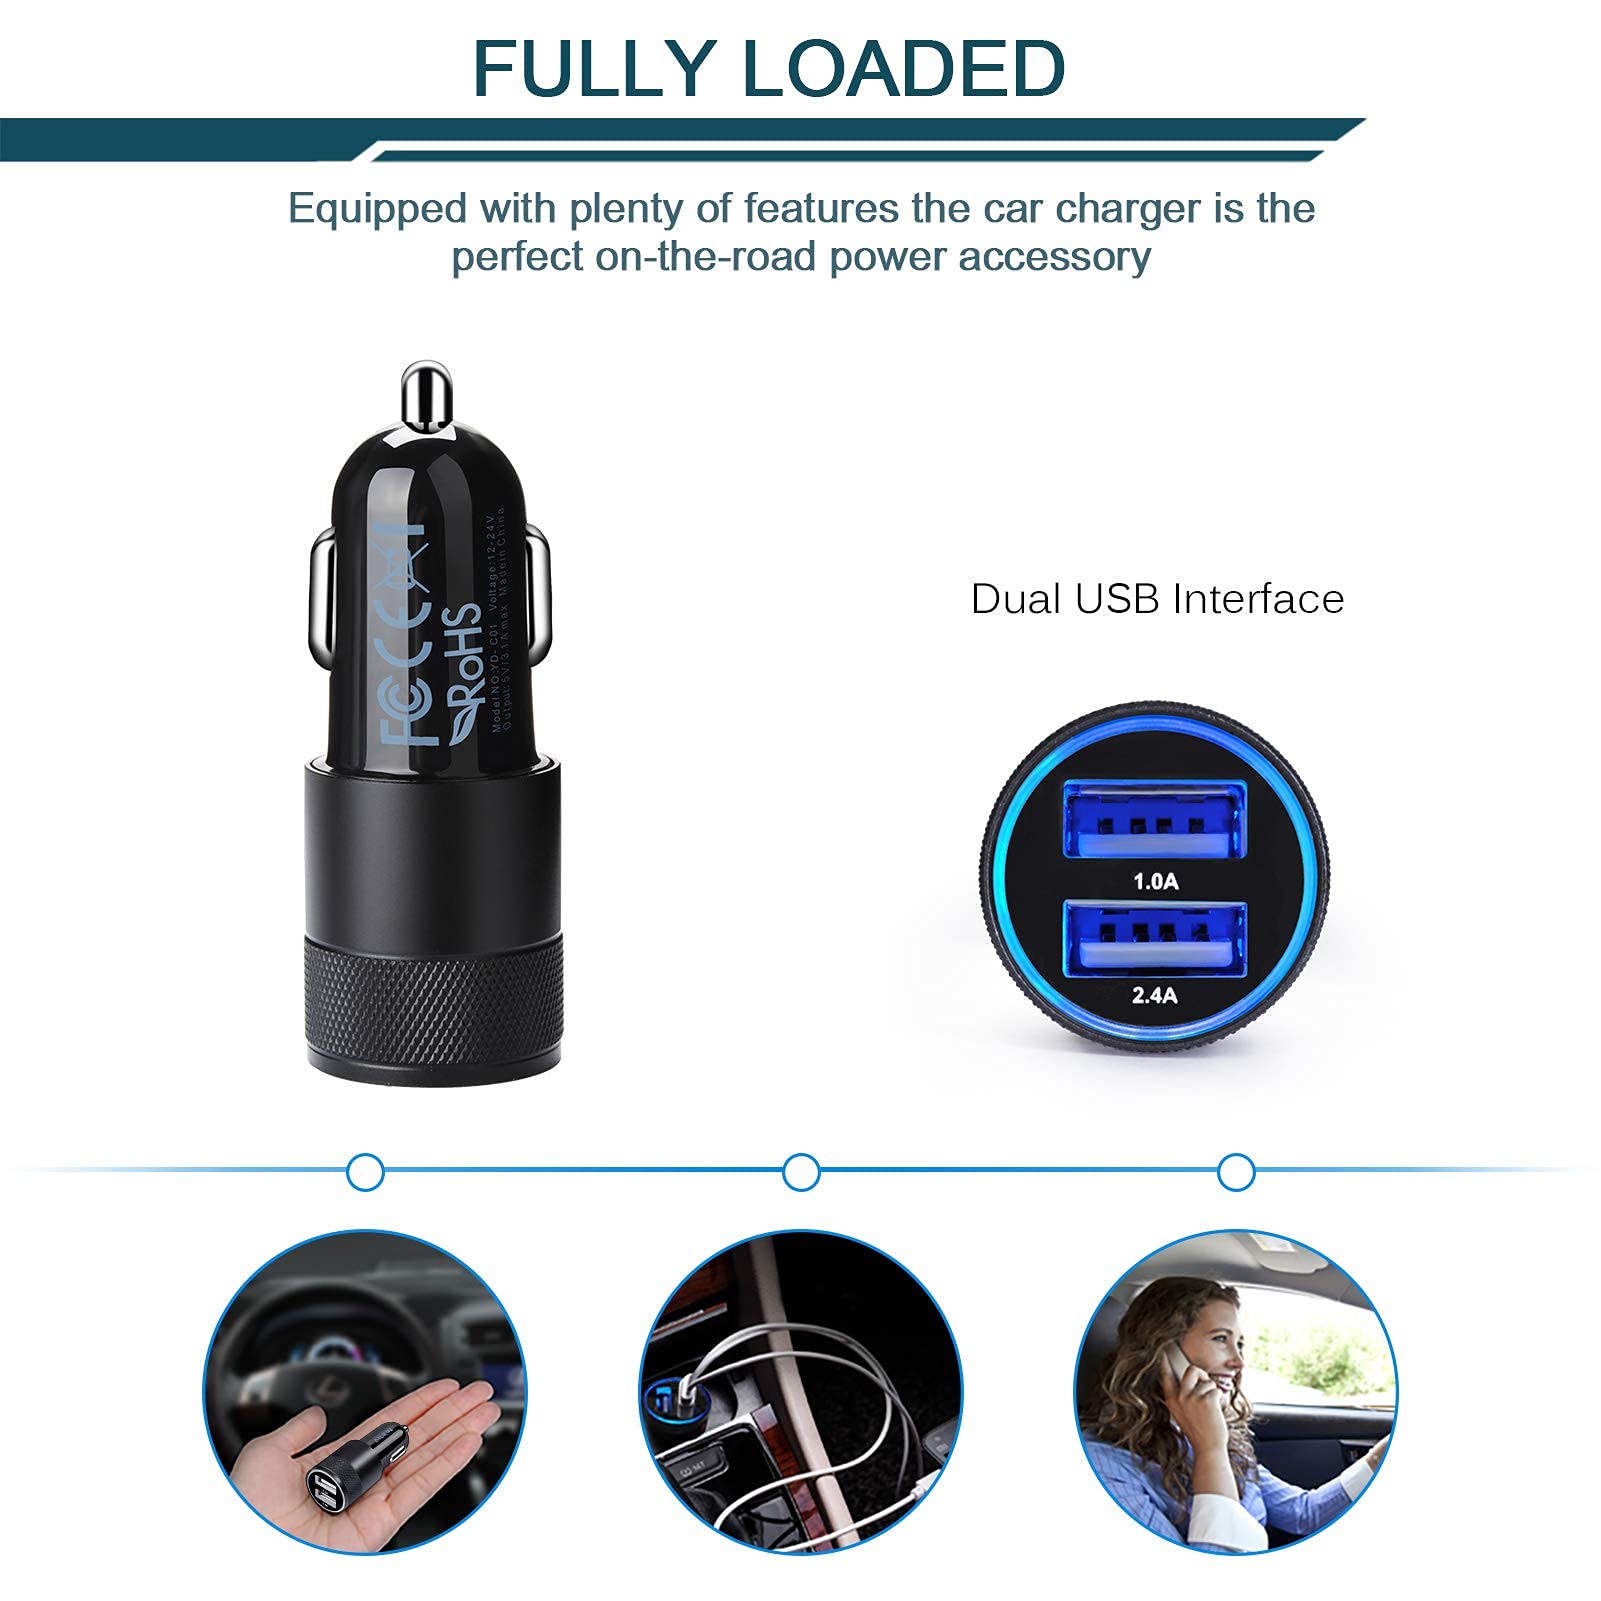 AILKIN 3.4a Fast Charge Dual Port USB Cargador Carro Lighter Adapter& AILKIN Android USB 2.0A Male to Micro B Charger Cord